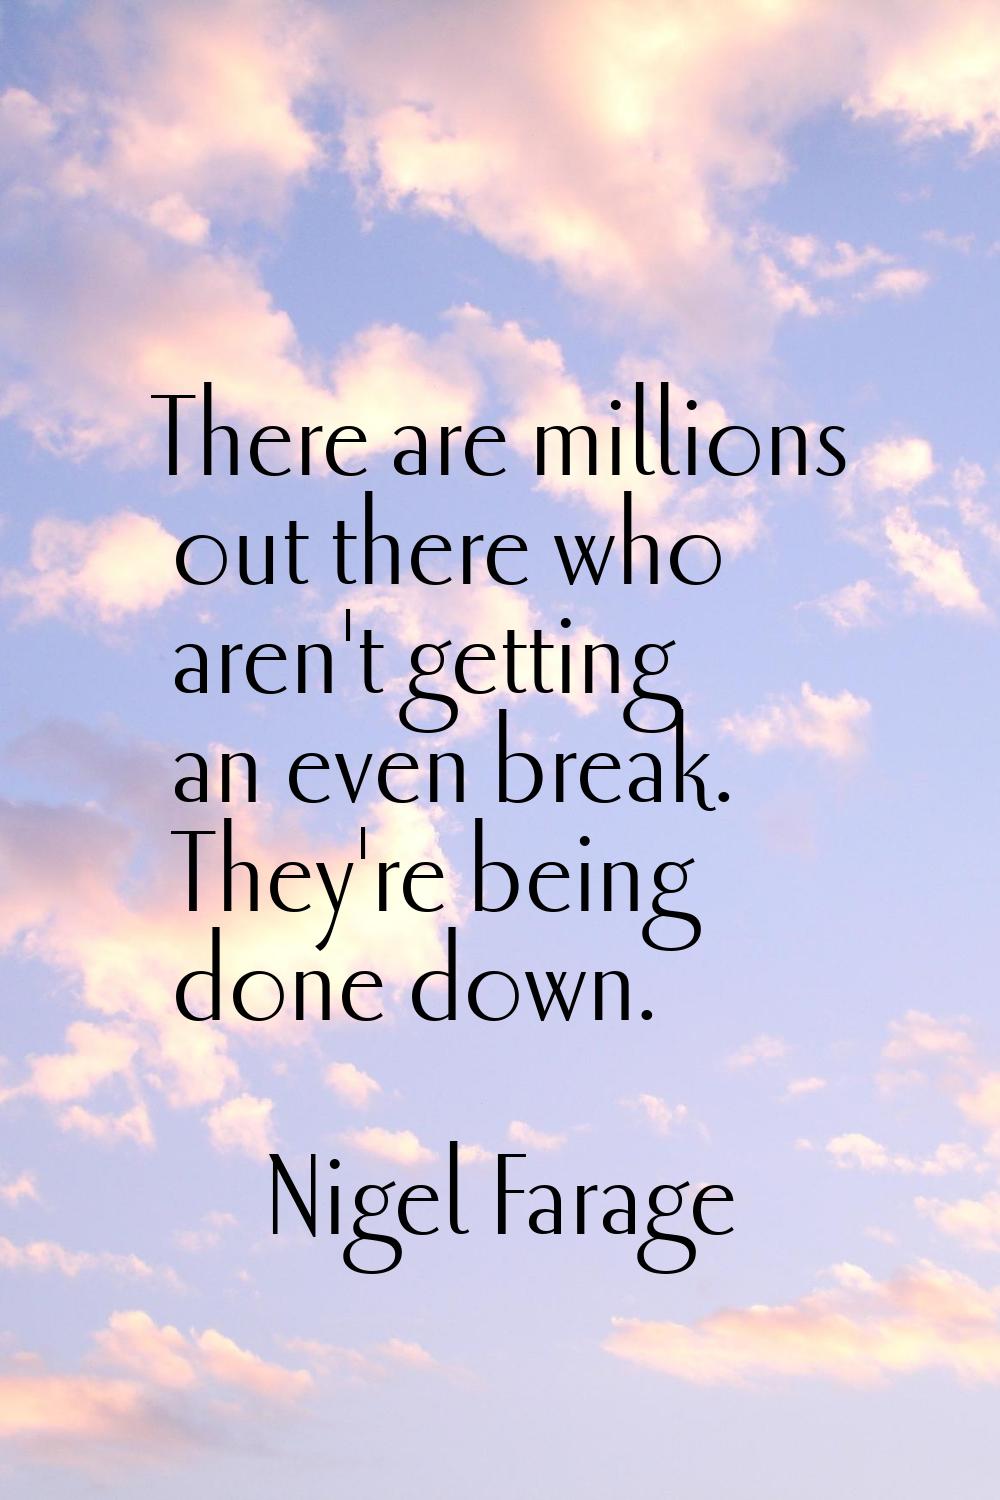 There are millions out there who aren't getting an even break. They're being done down.